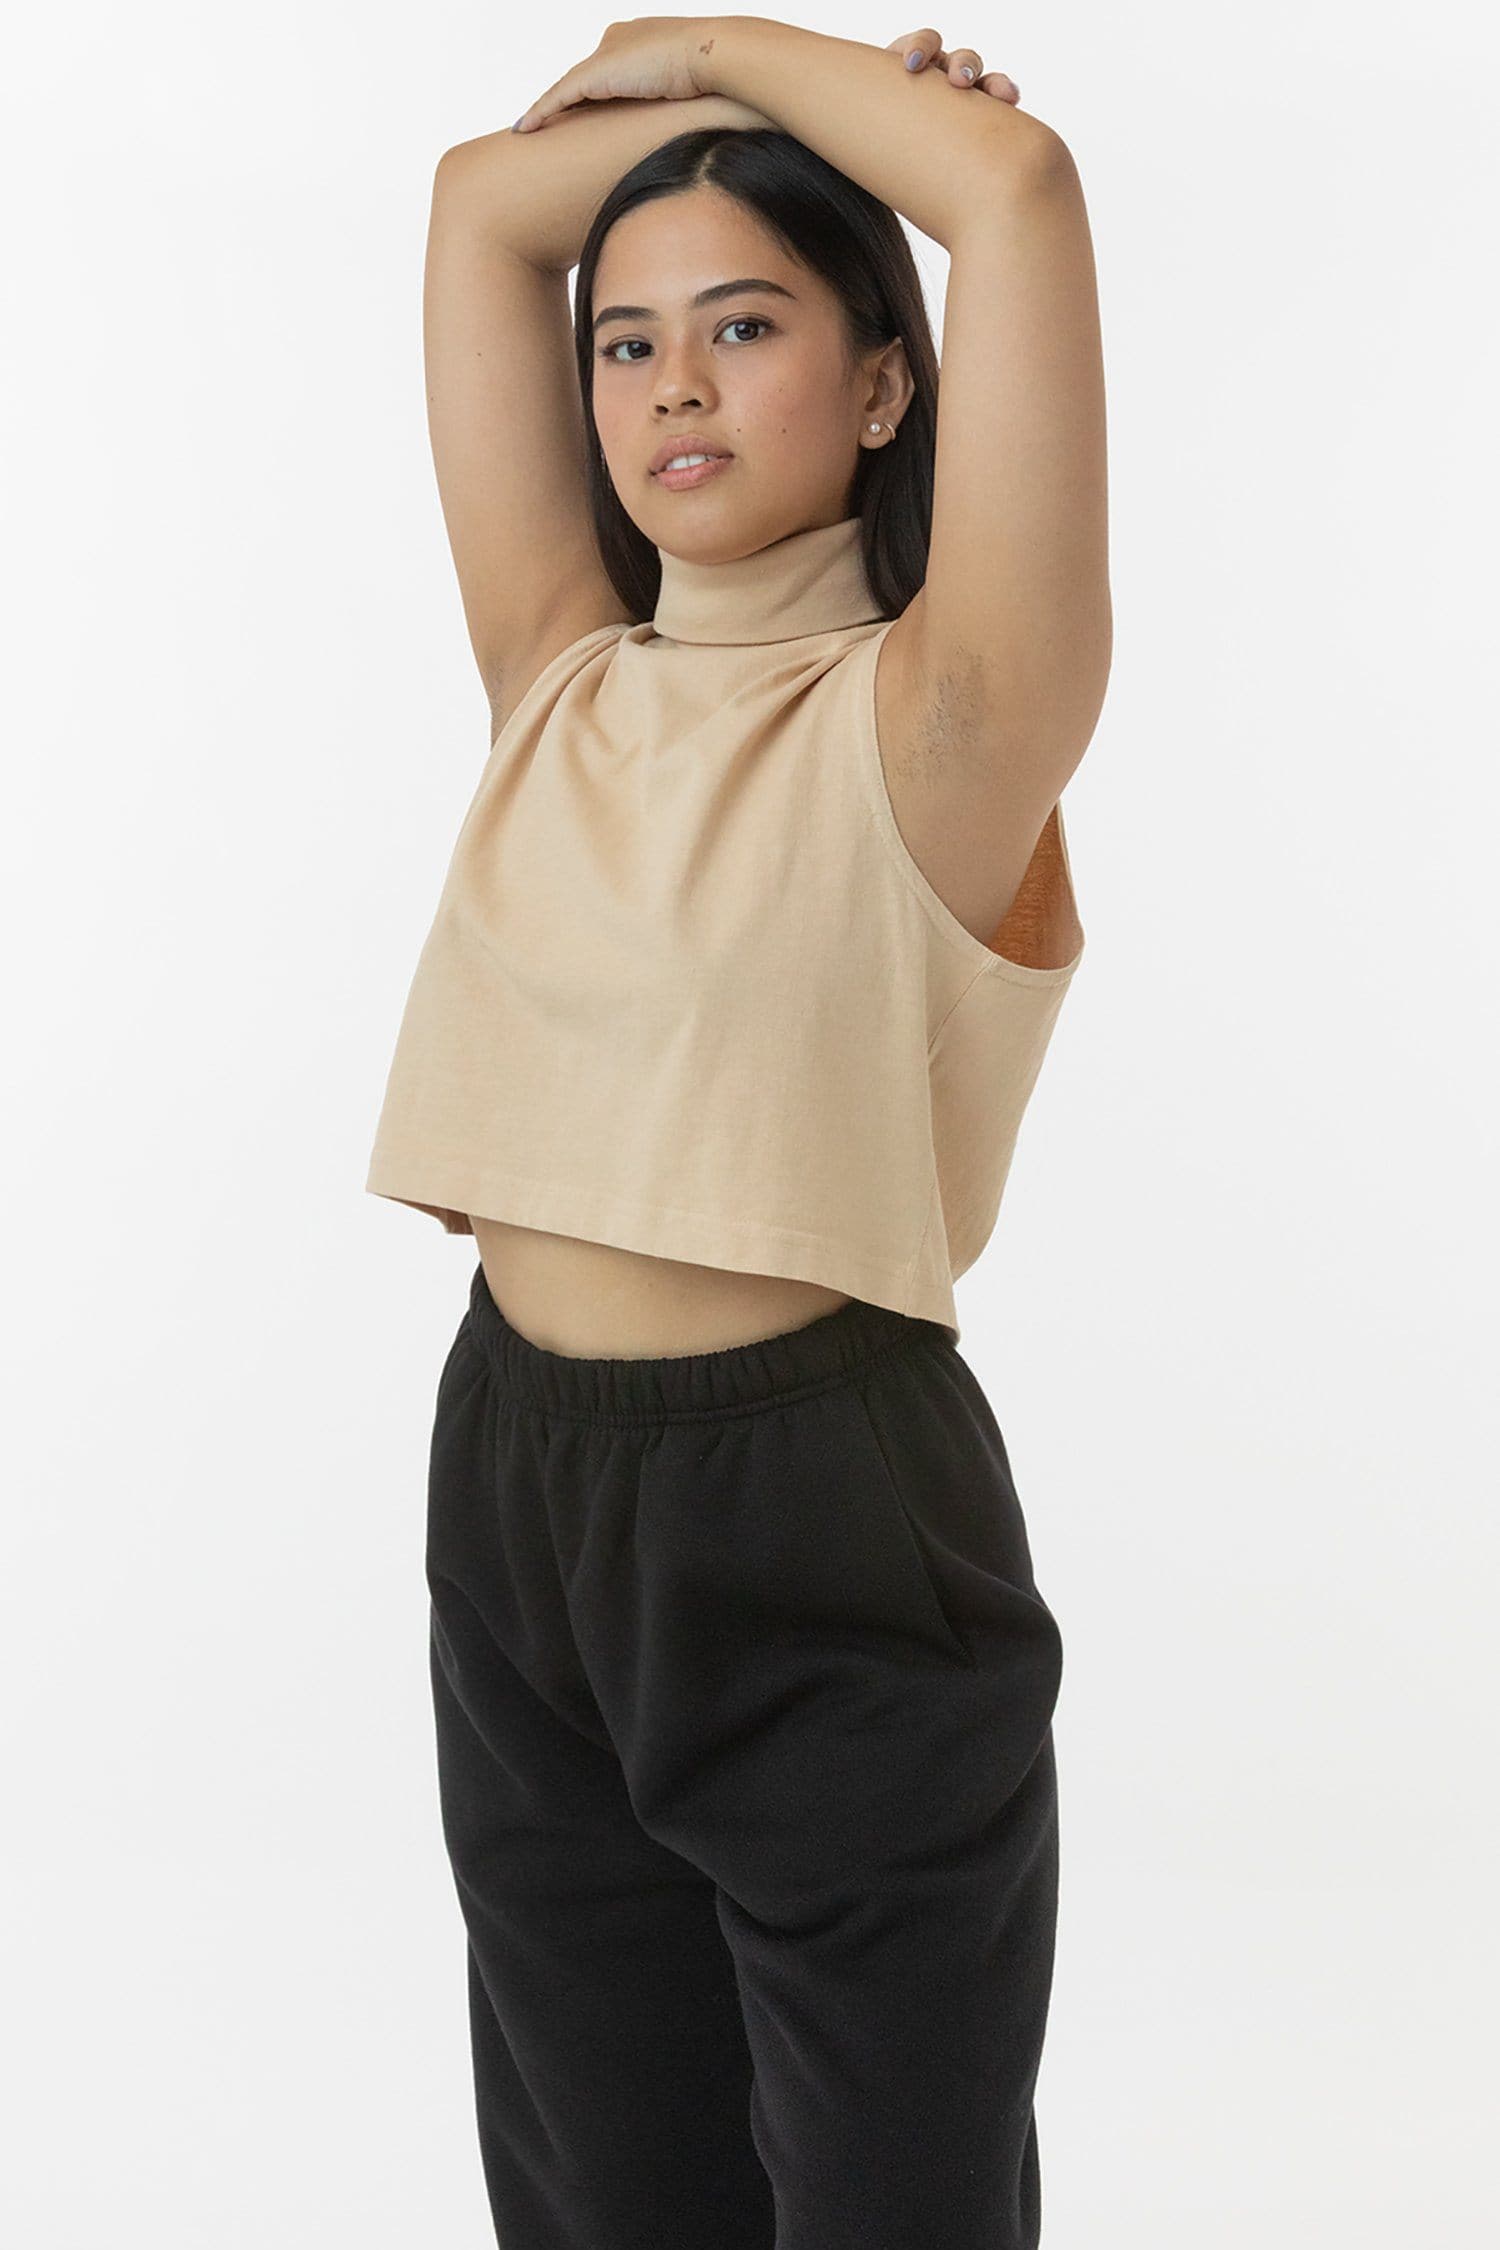 Lace Turtleneck Crop Top - Balera - Product no longer available for purchase